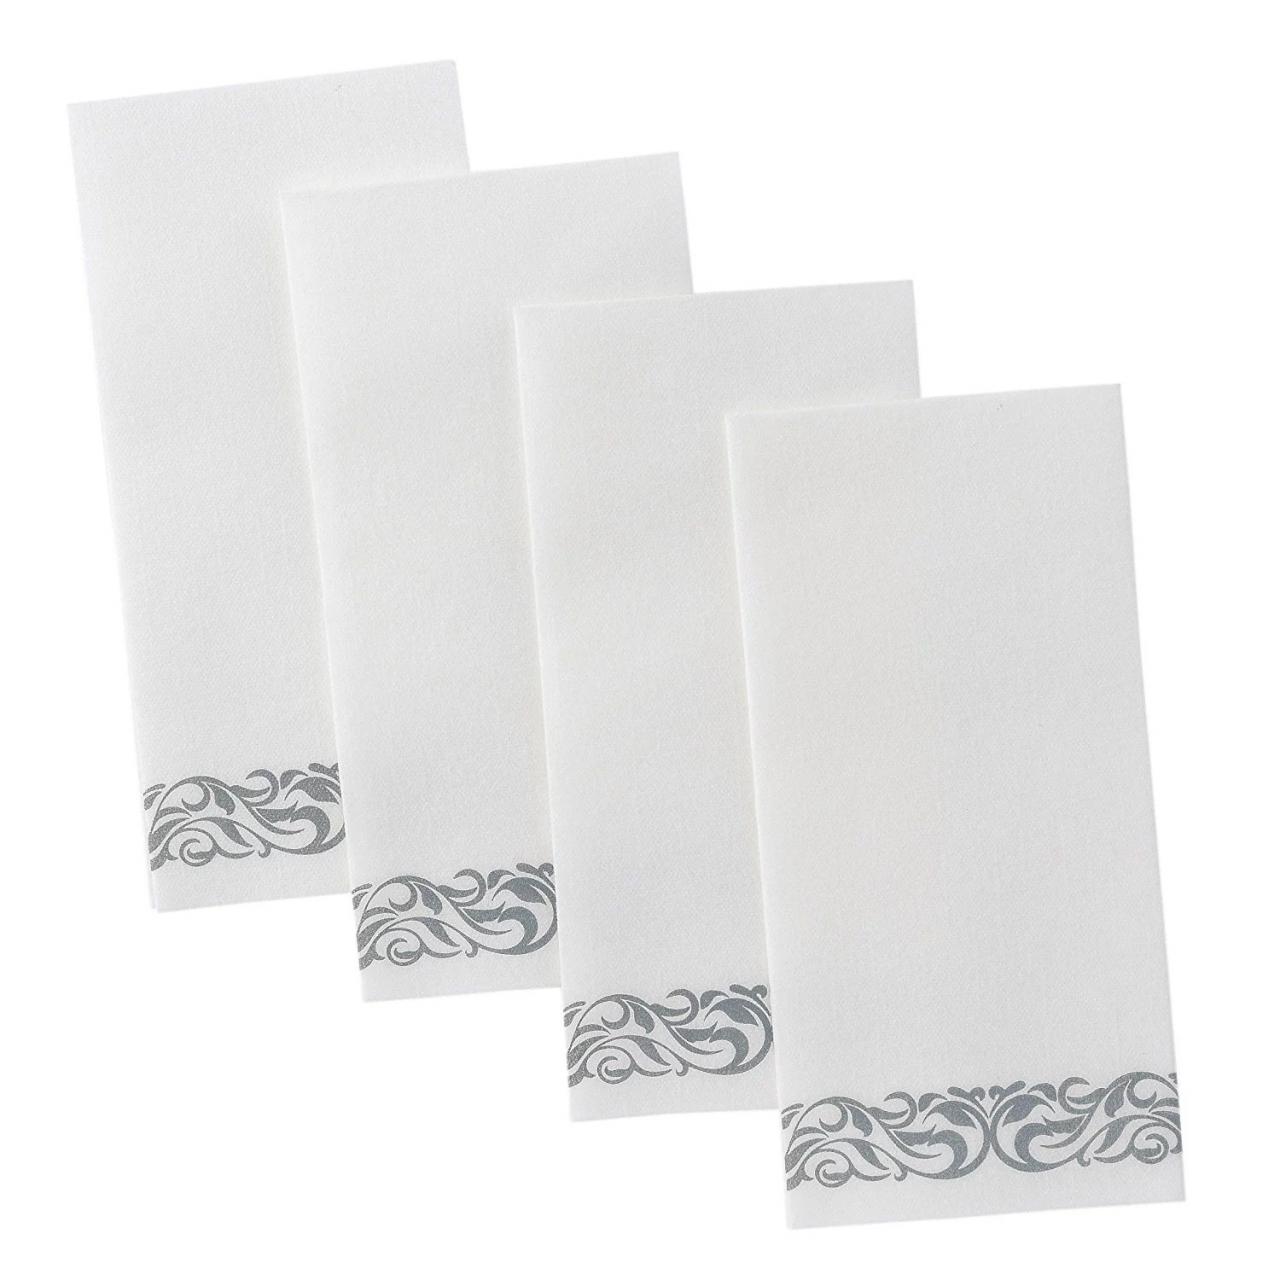 Superior Quality Decorative LinenFeel Paper Hand Towels By